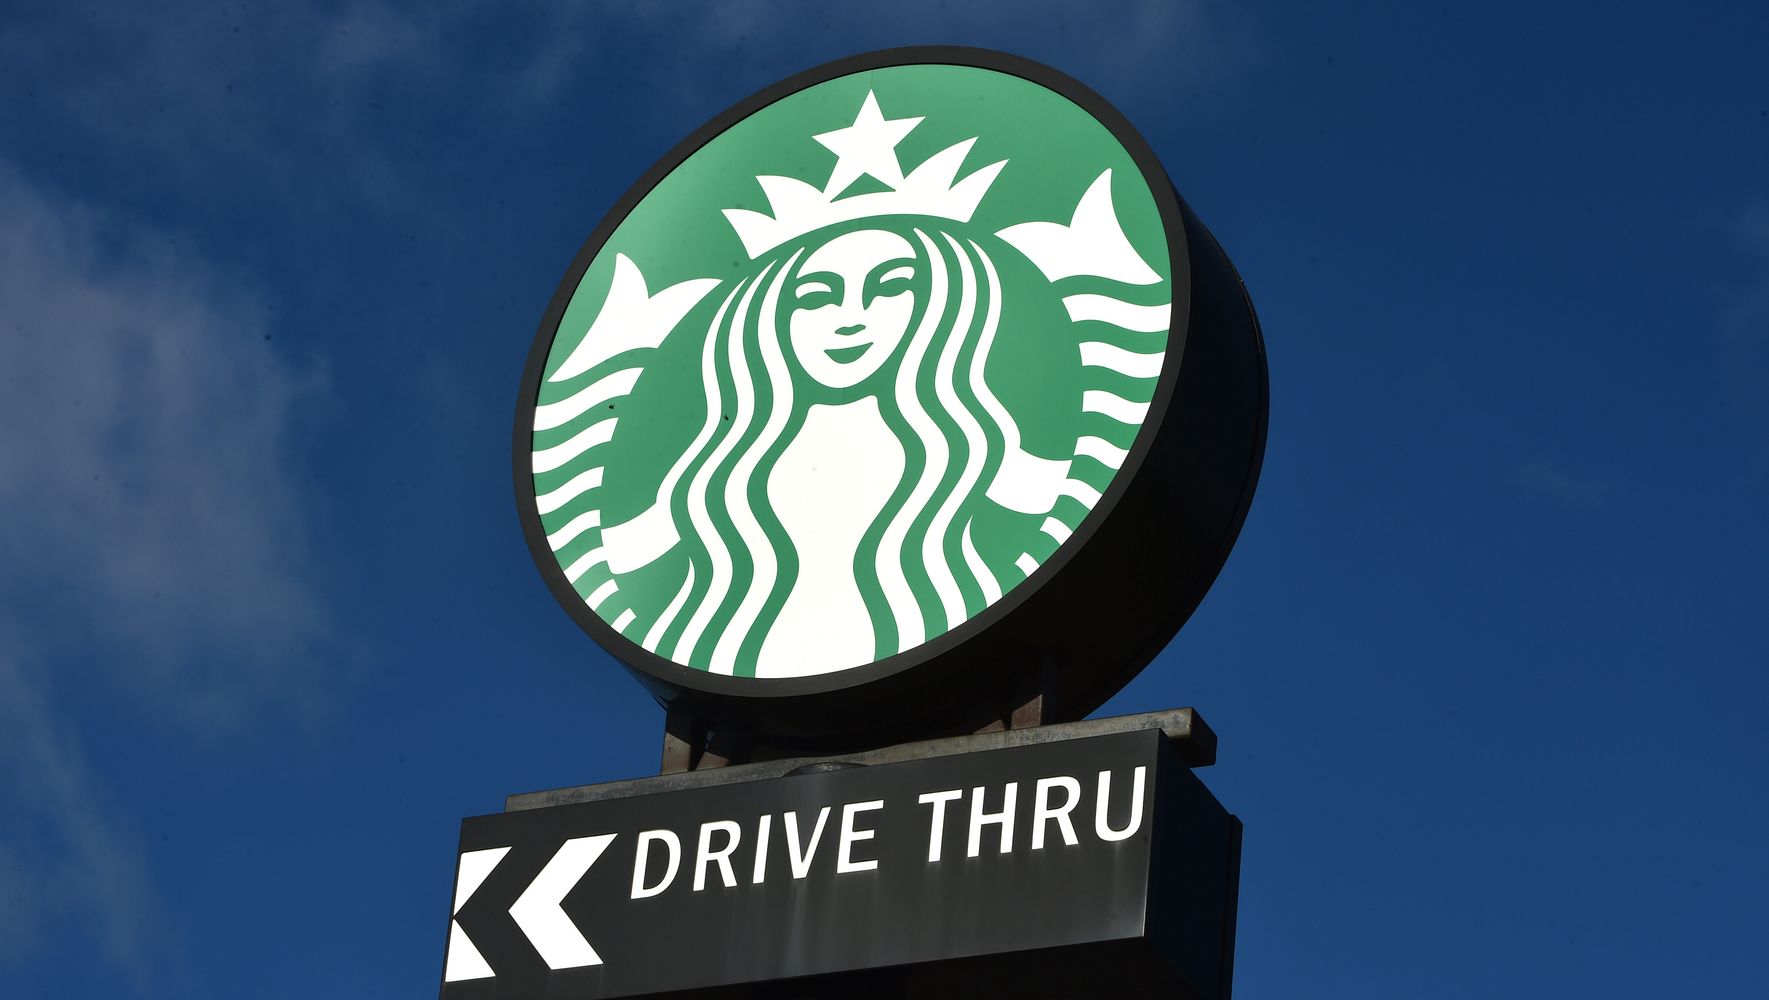 Starbucks Illegally Retaliated Against Pro-Union Workers, Labor Officials Allege